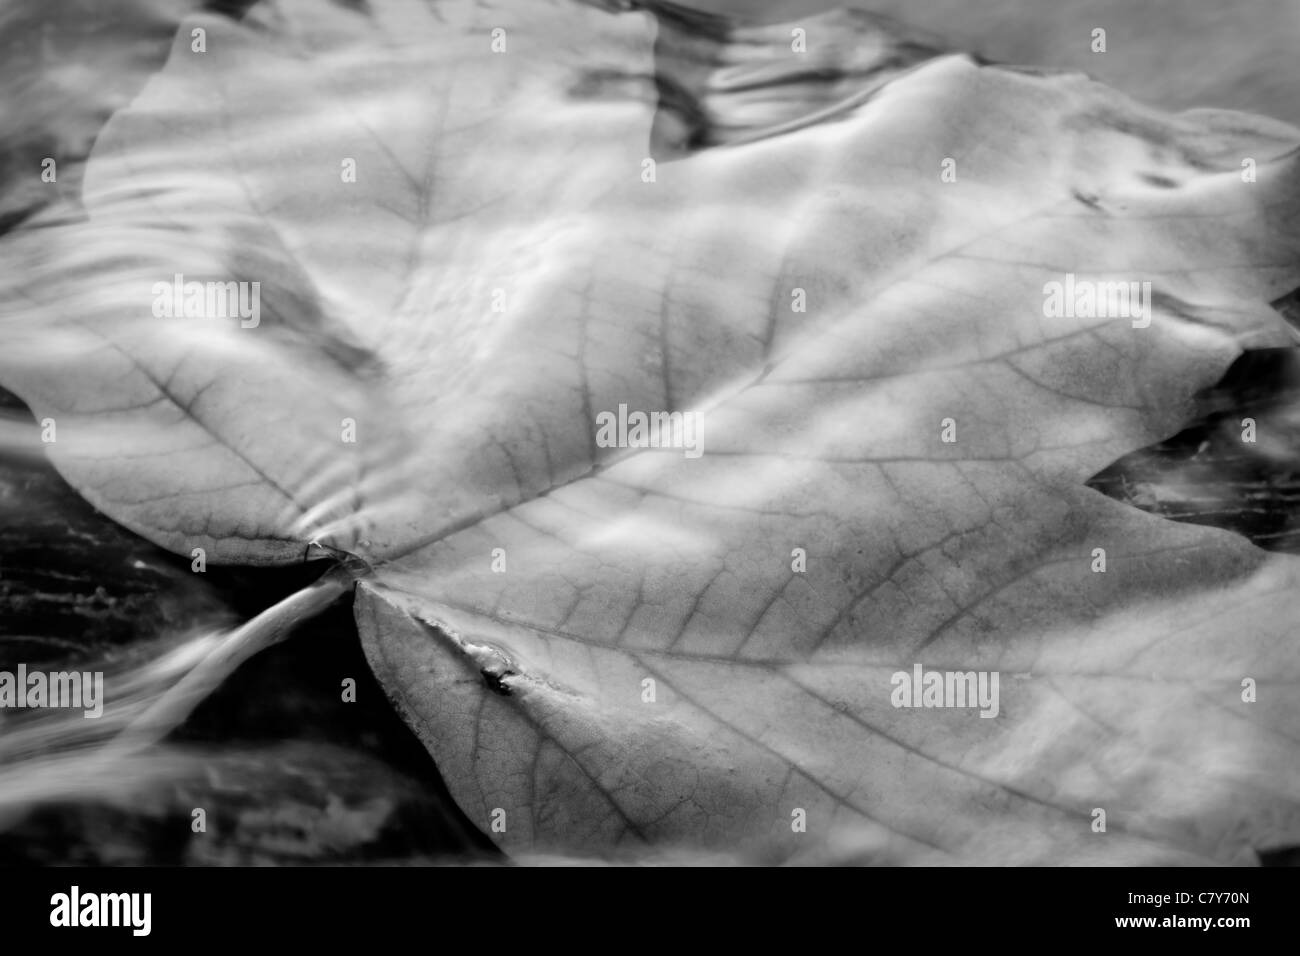 Sycamore leaf caught by water flow Stock Photo